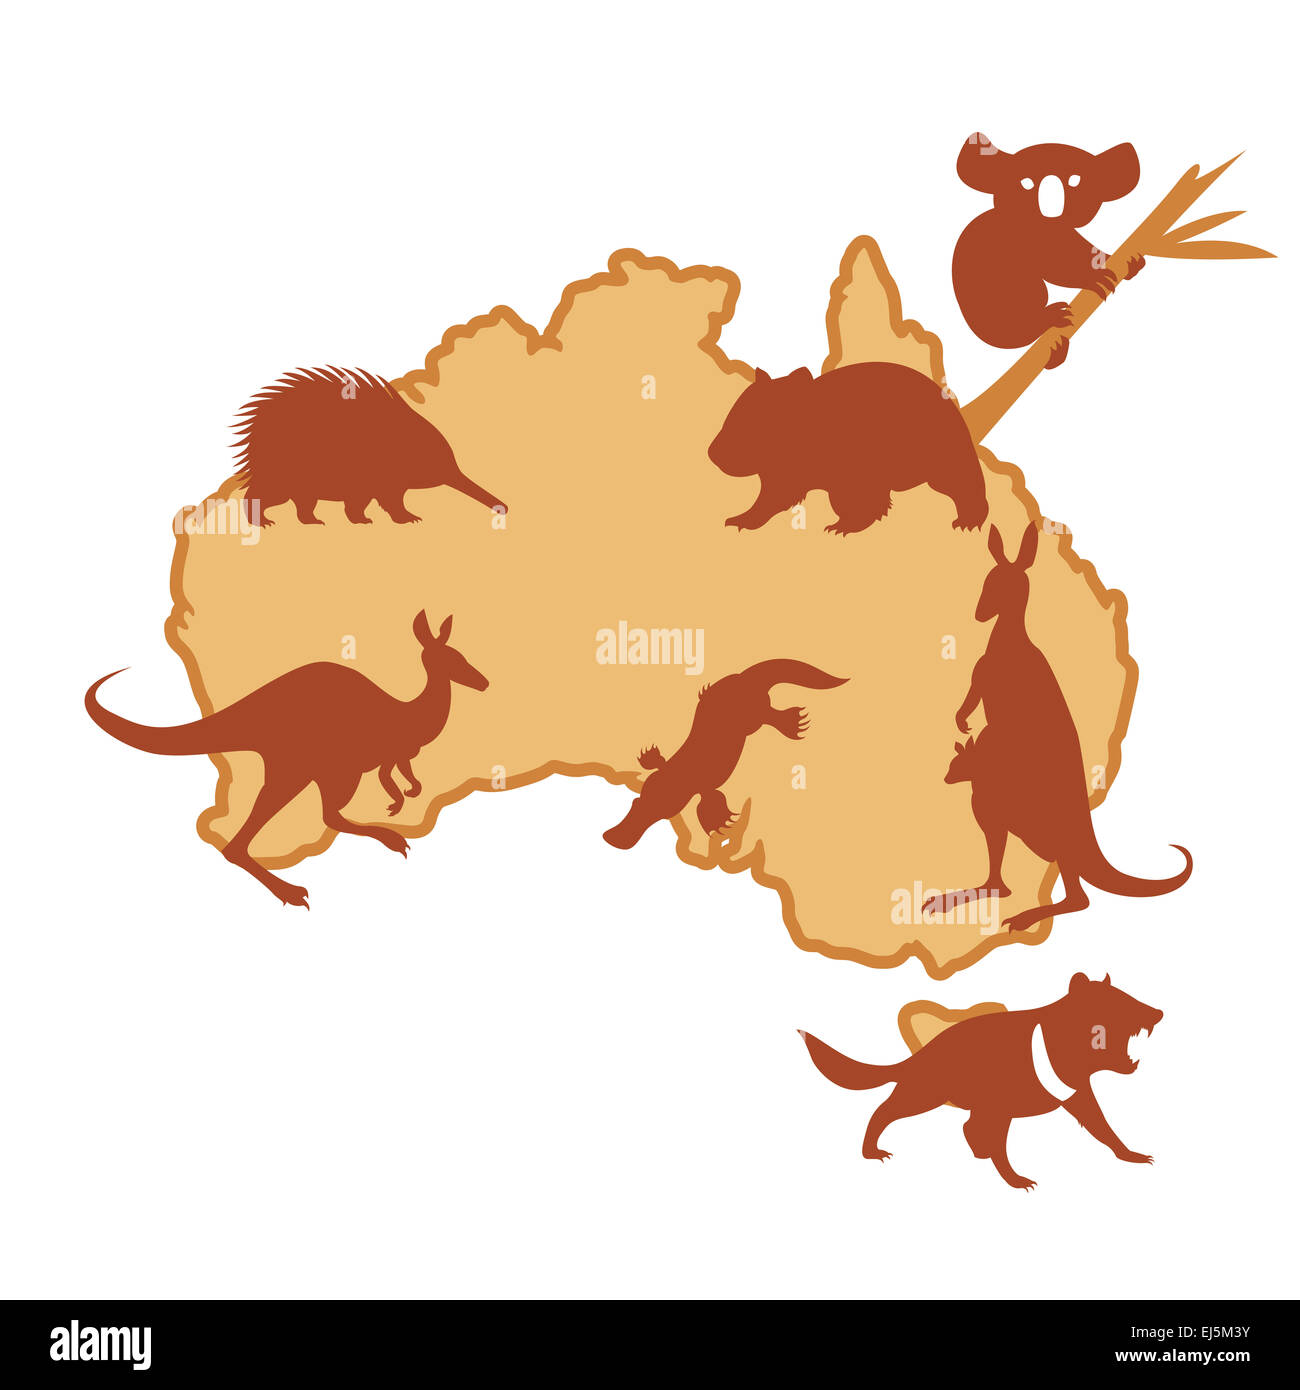 Vector image of Australis with silhouettes of animals Stock Photo